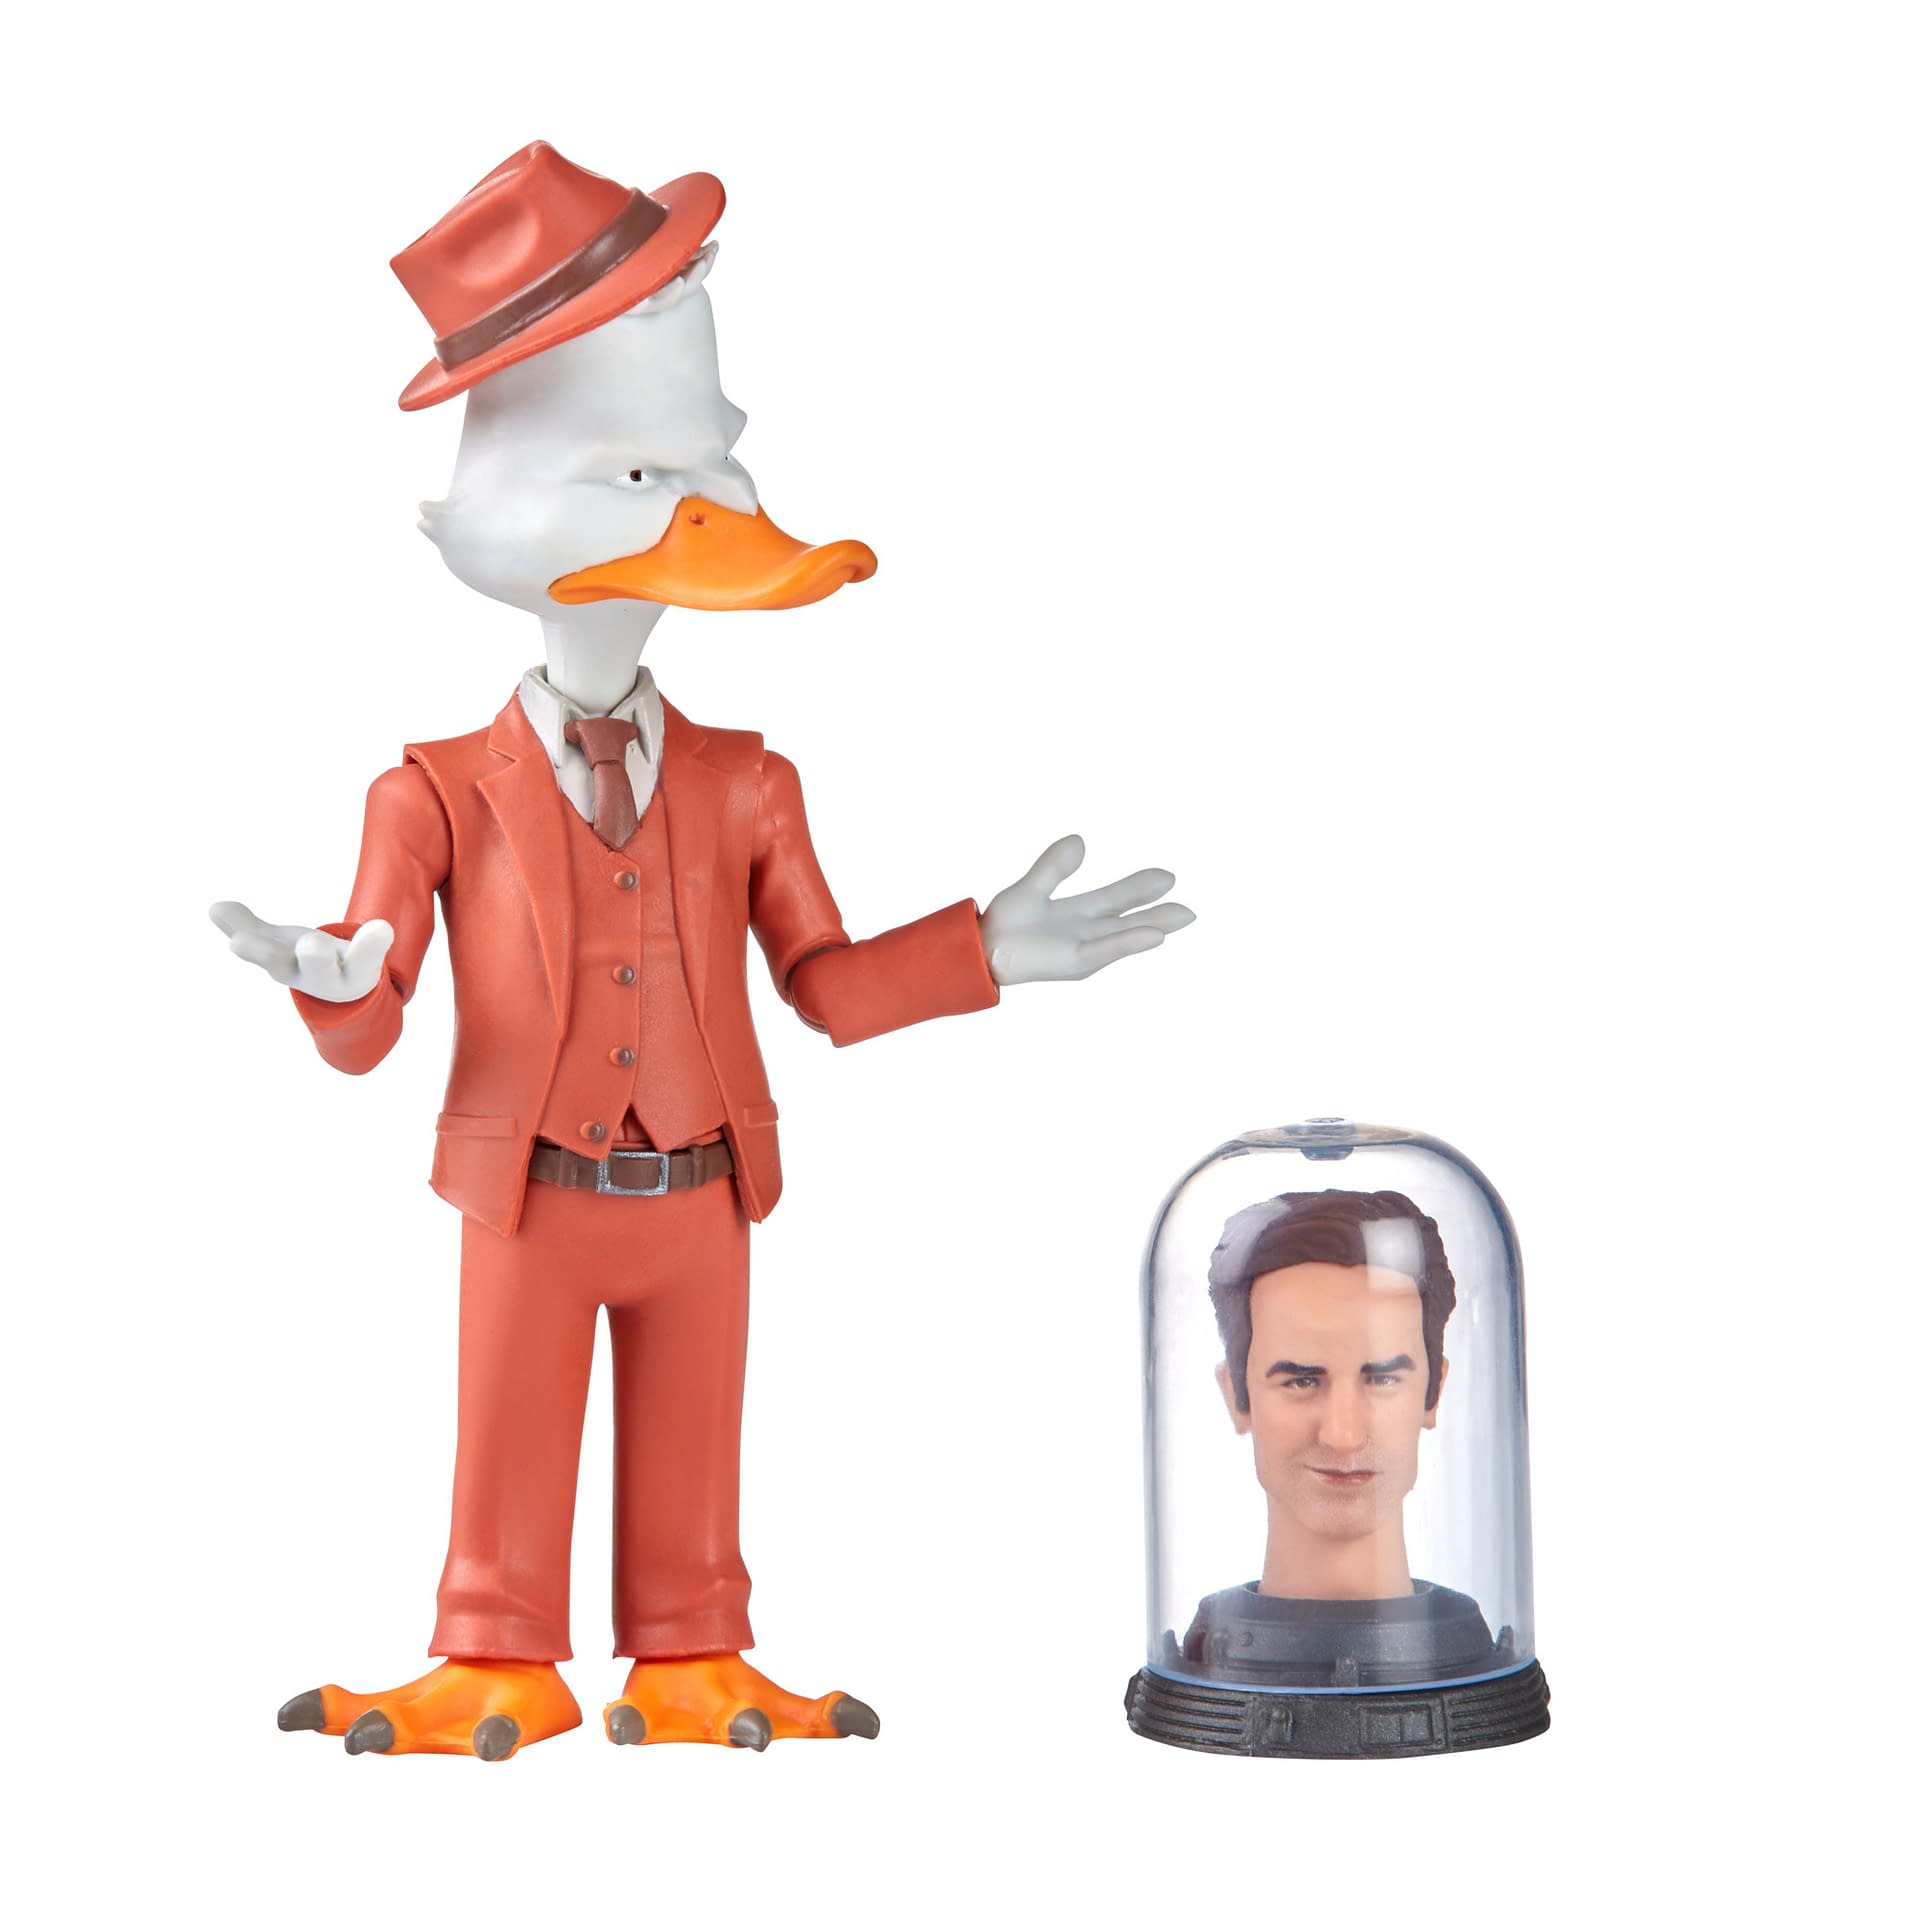 Howard the Duck Comes to Hasbro with New Marvel Legends Release